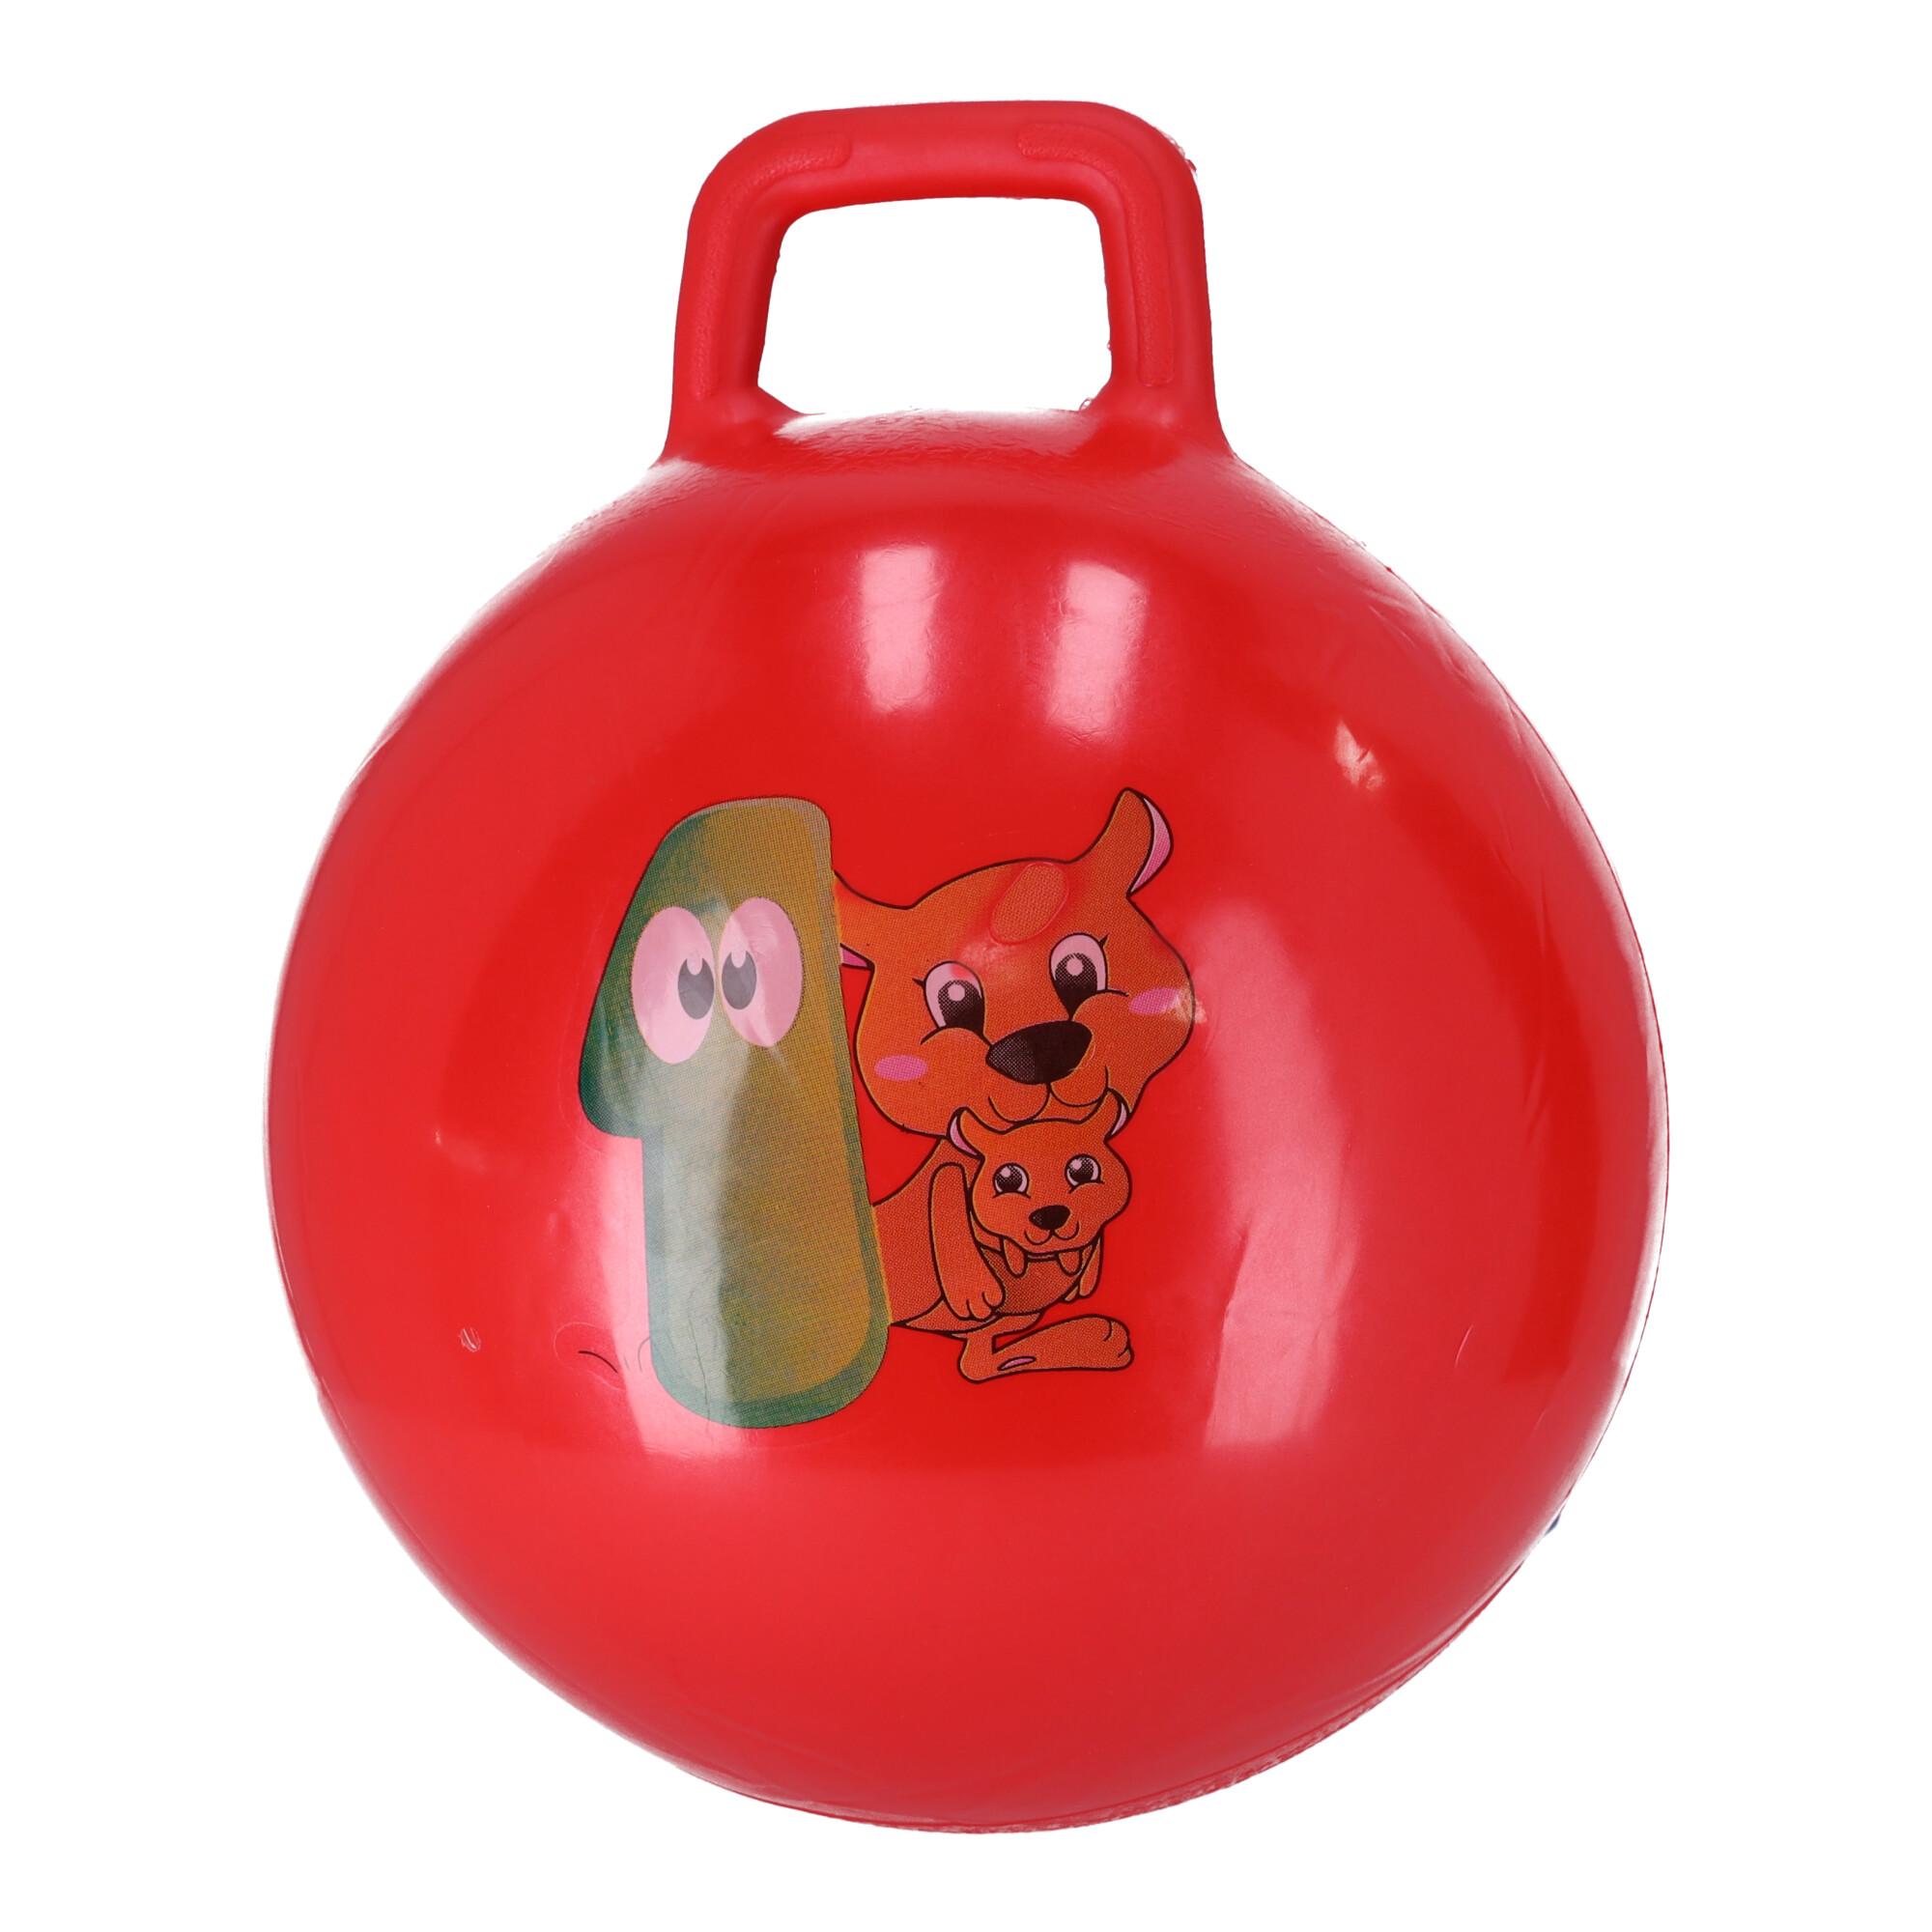 Jumping ball, jumper for children with handles - red